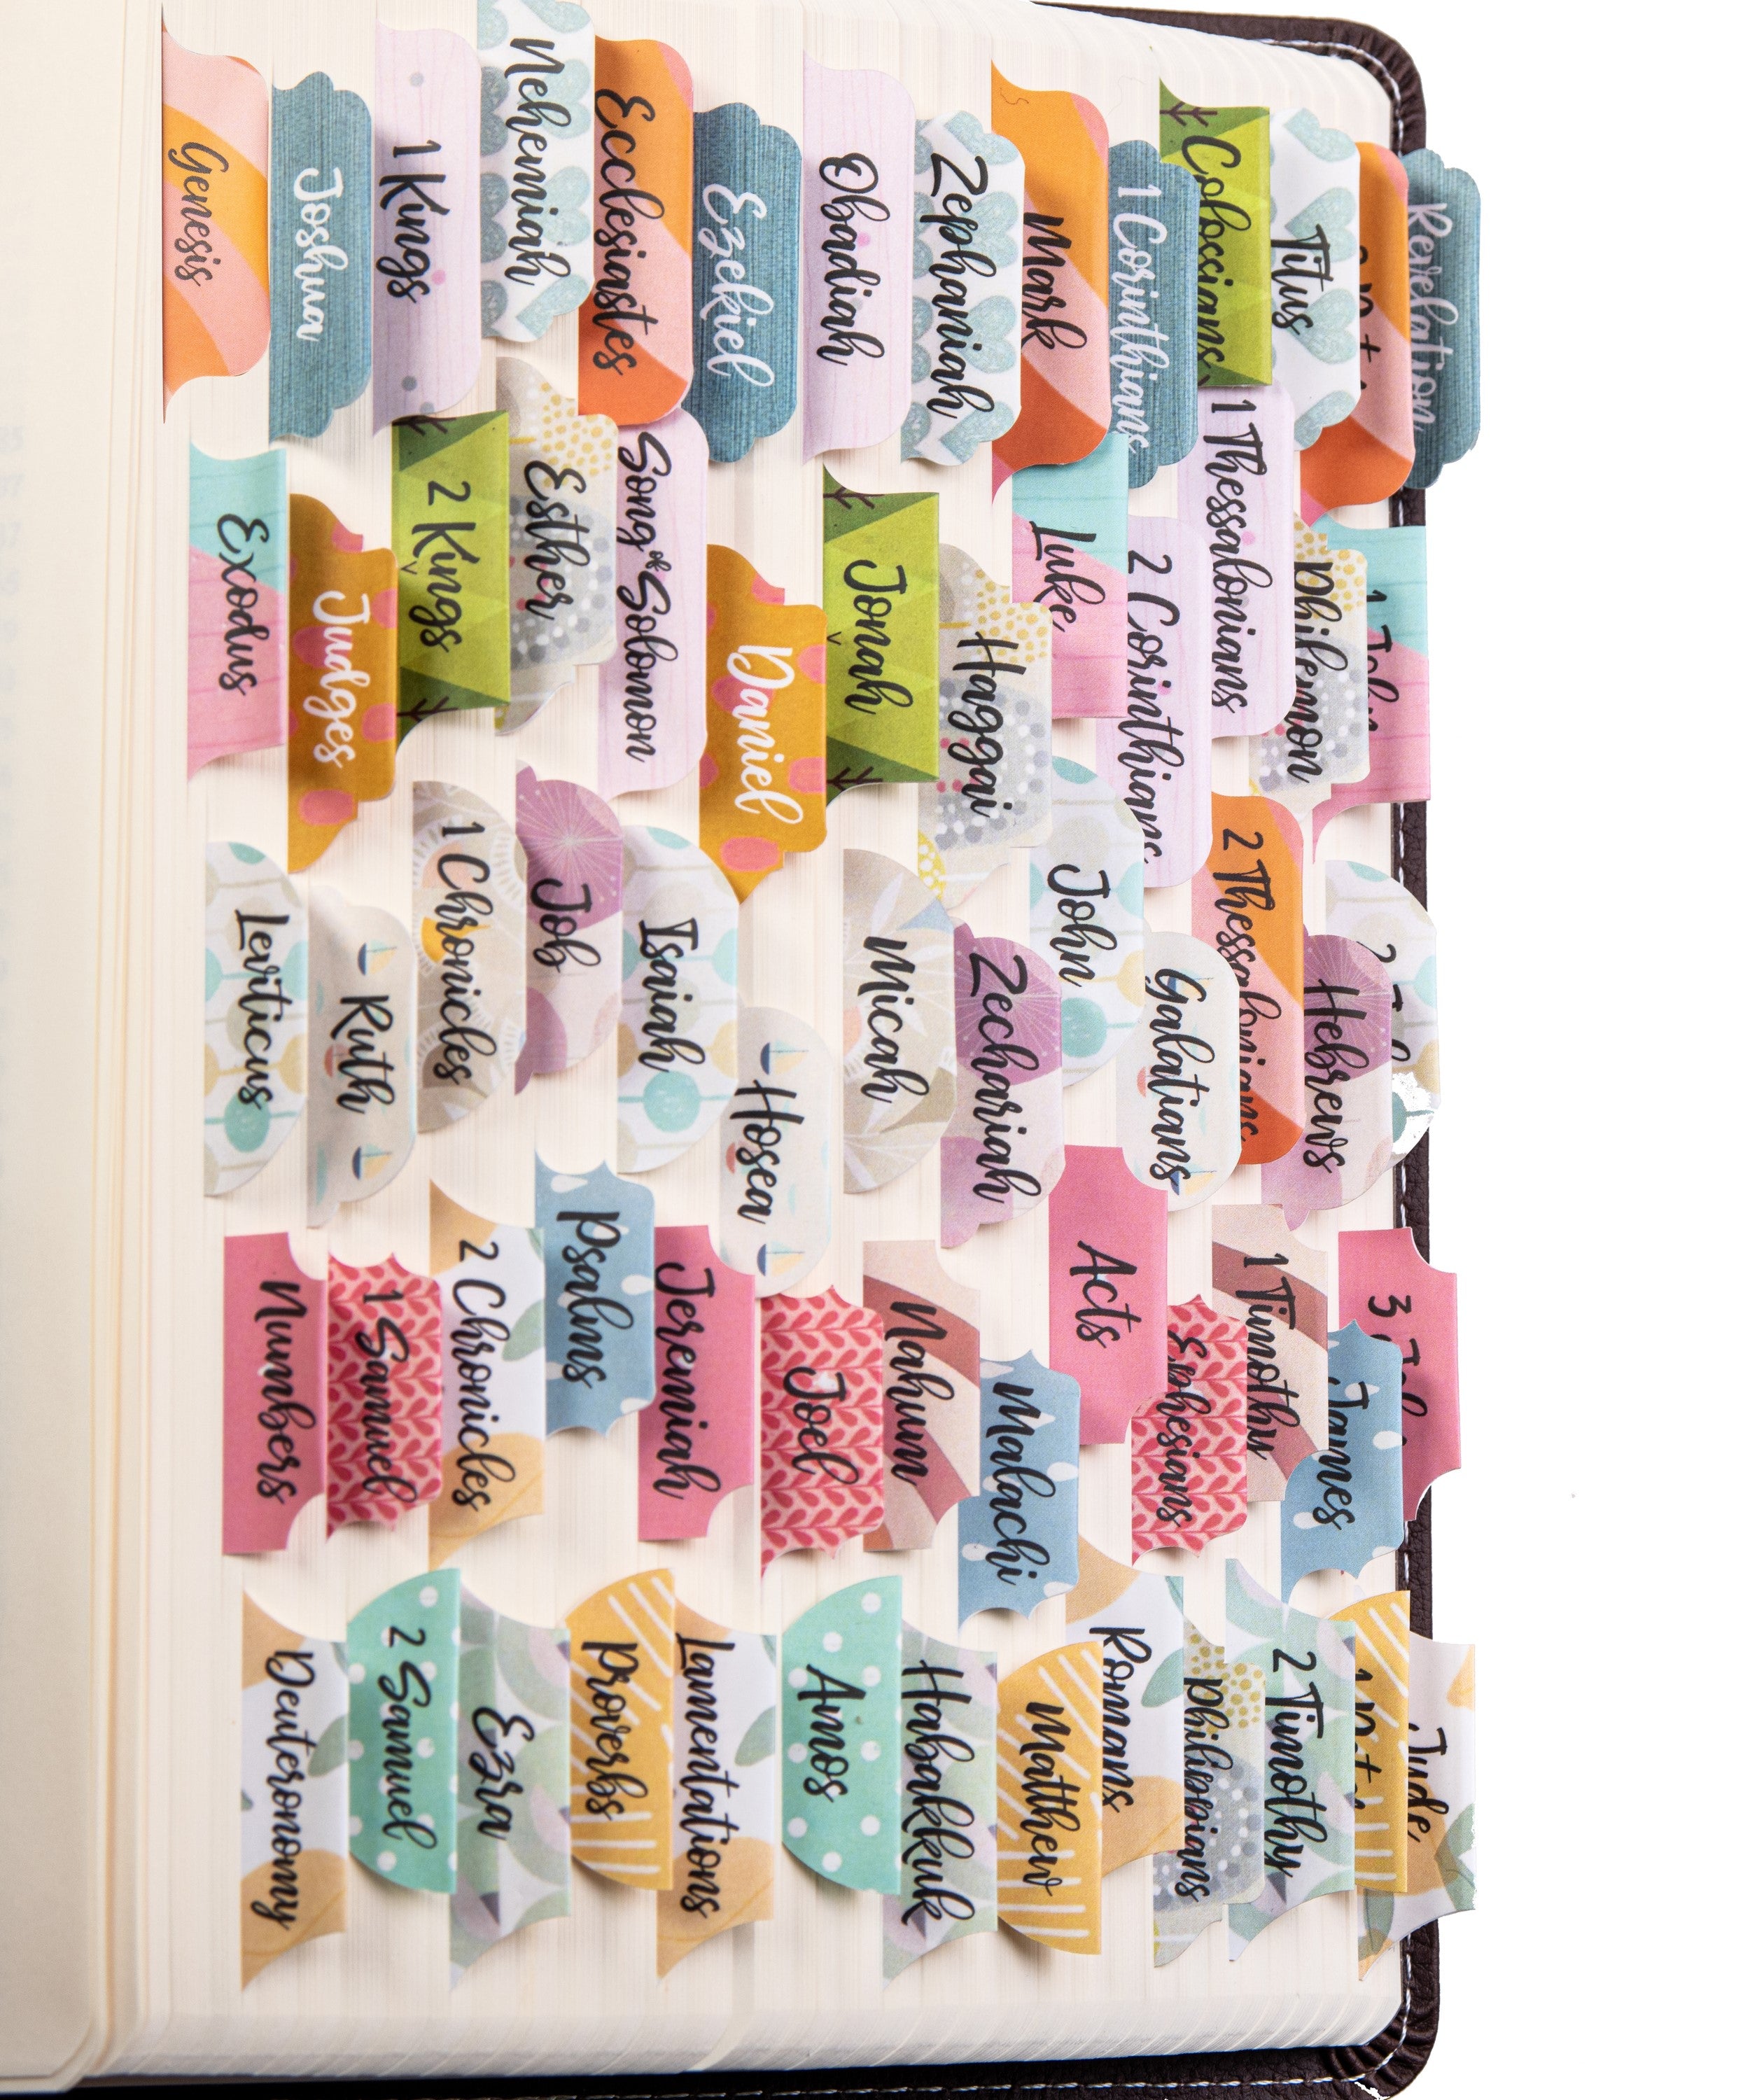 DiverseBee Laminated Bible Tabs (Large Print Easy to Read) Personalized Bible Journaling Tabs 66 Book Tabs and 14 Blank Tabs - Diverse Theme